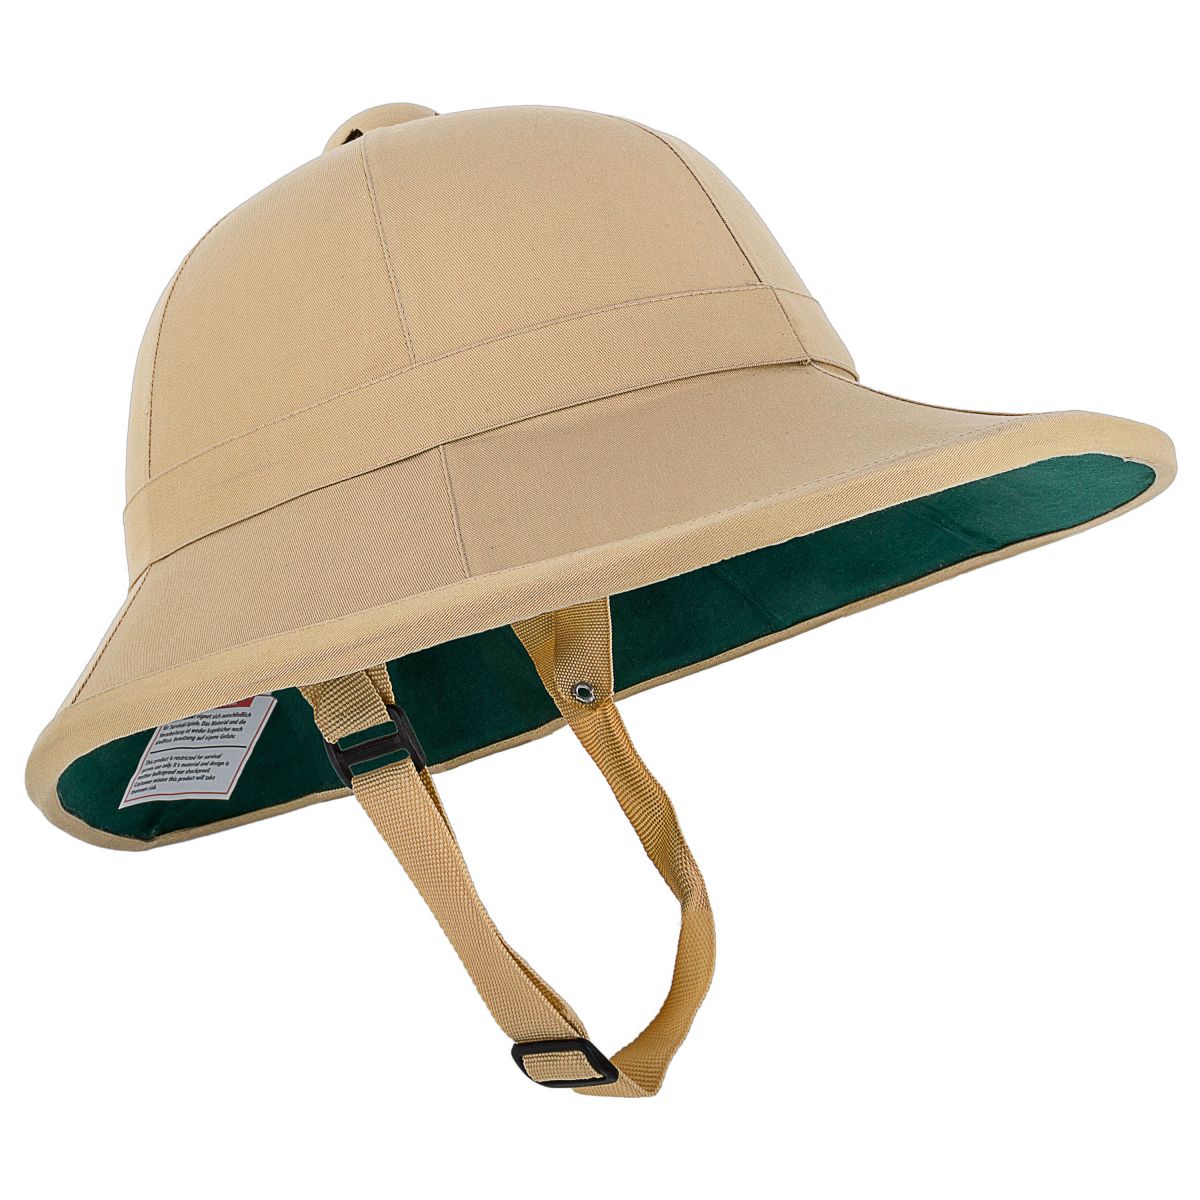 Purchase the British Tropical Helmet New Style khaki by ASMC